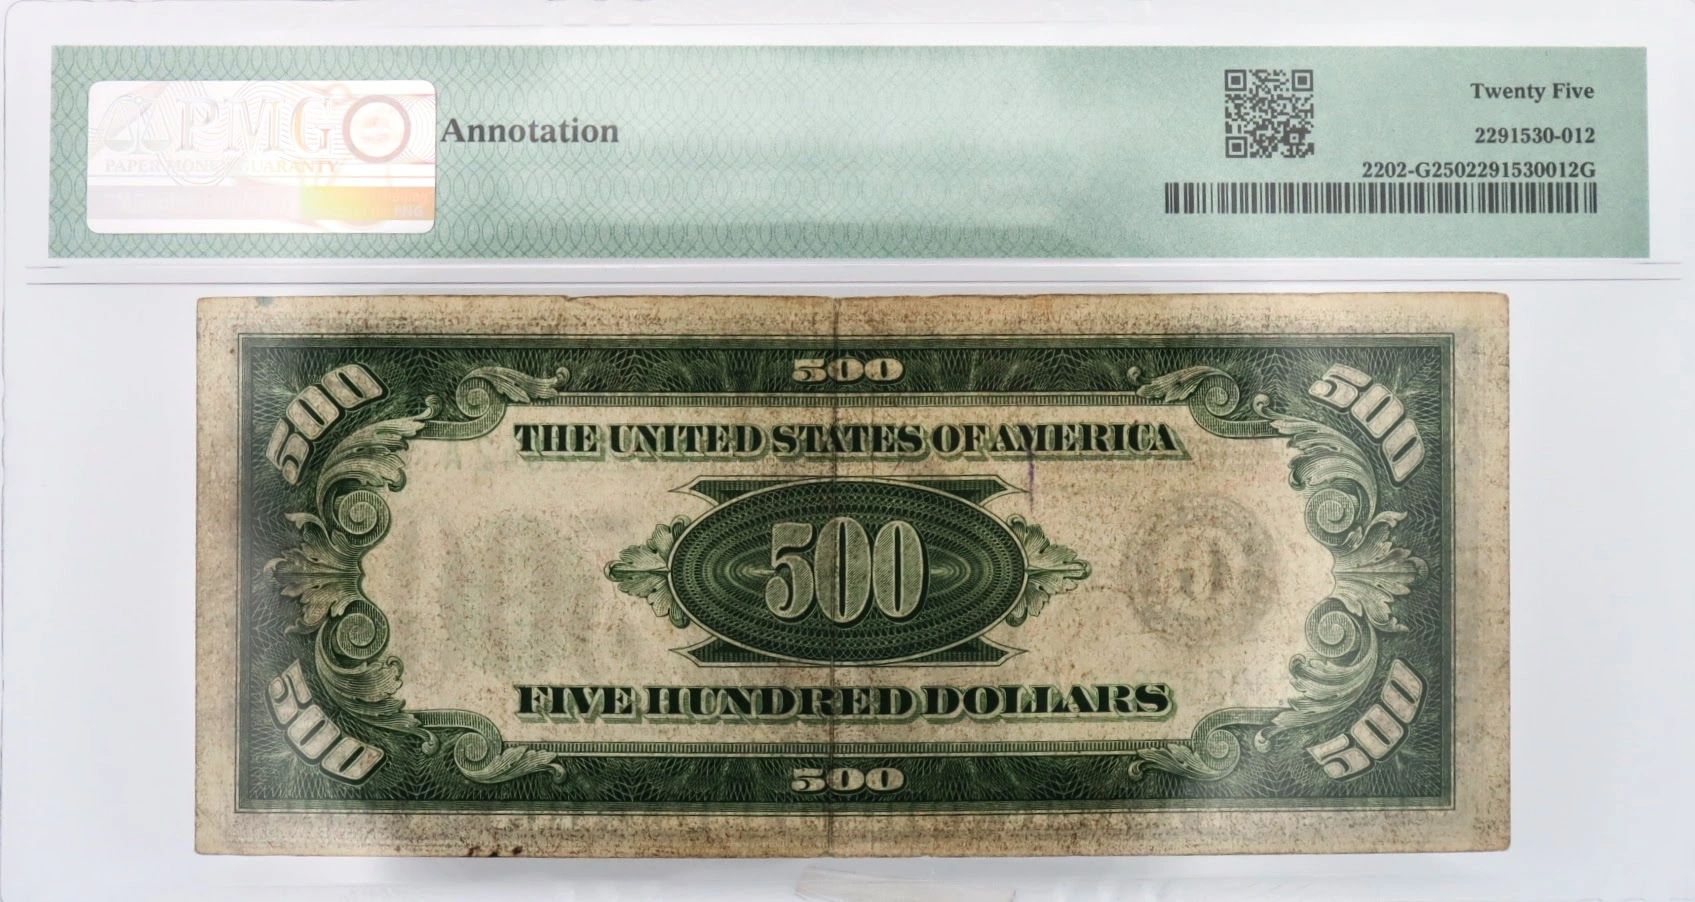 Back of US $500 Collectible Currency Bill ie: Note